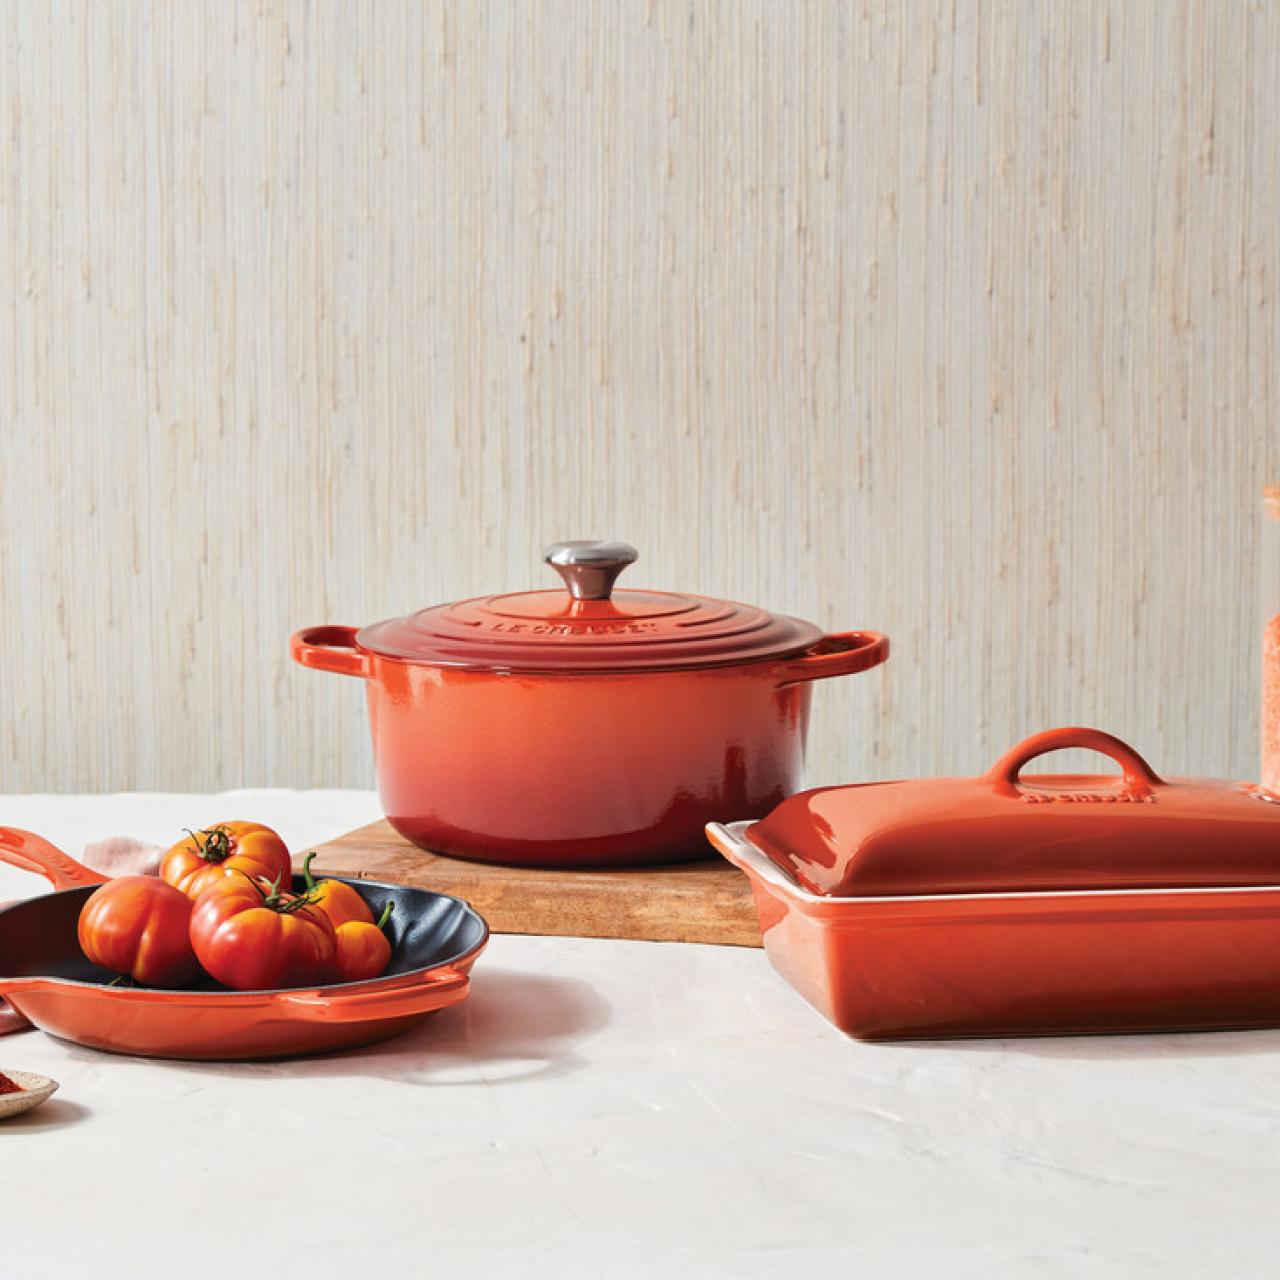 https://food.fnr.sndimg.com/content/dam/images/food/products/2021/7/6/rx_LeCreuset-CayenneGrouping.jpg.rend.hgtvcom.1280.1280.suffix/1625585428695.jpeg